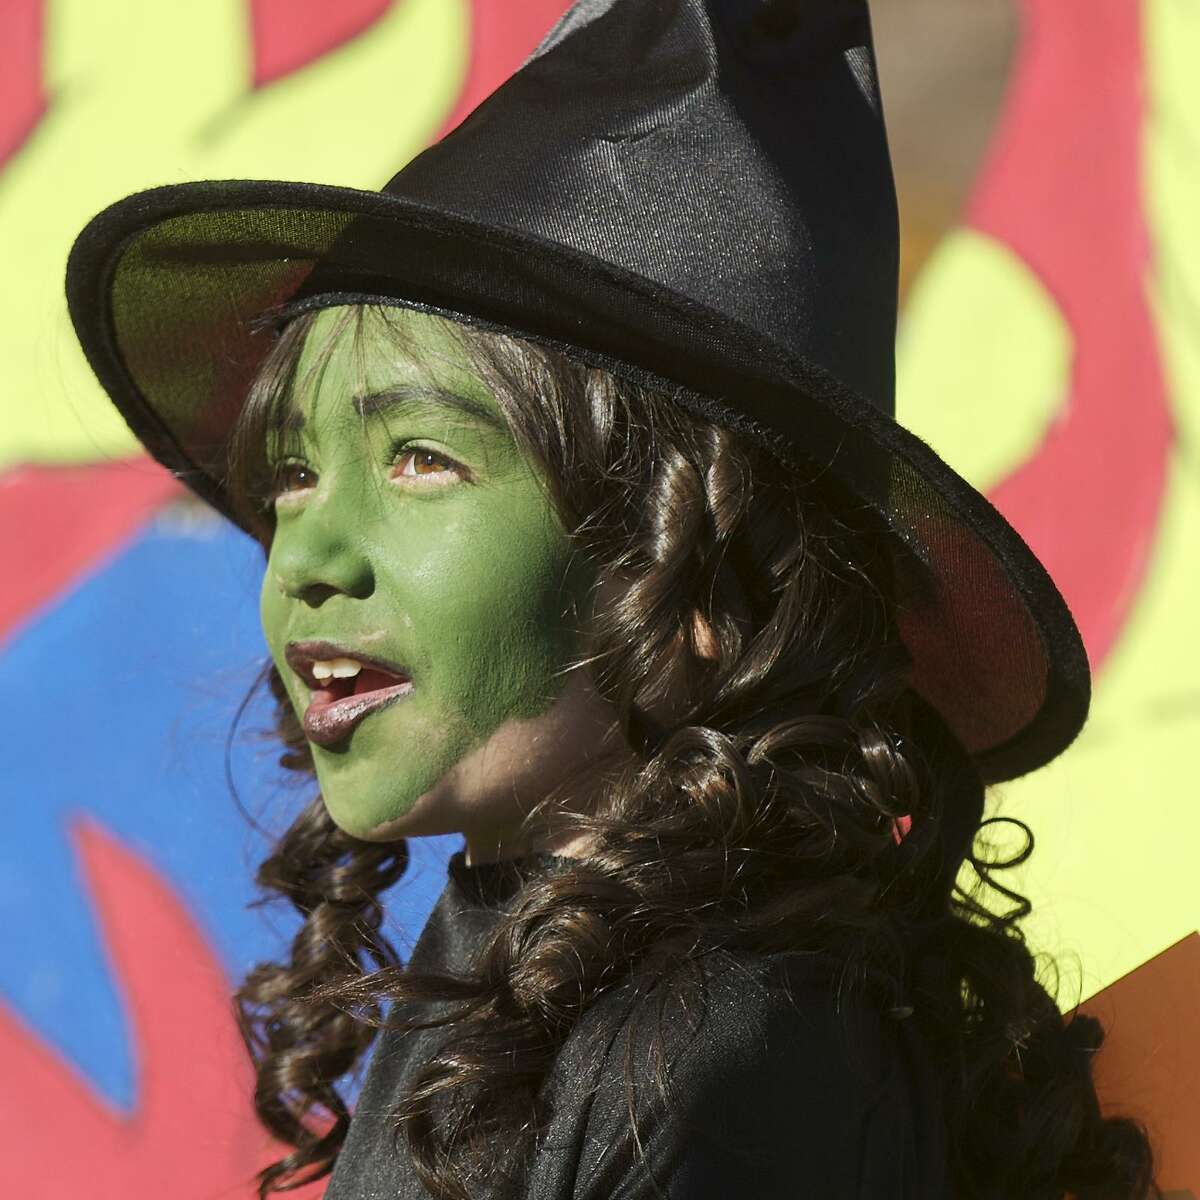 A young Wicked Witch of the West attends a Halloween event in Danbury, in 2013. A recent study shows there can be some creepy stuff lurking in cosmetic products aimed at children.